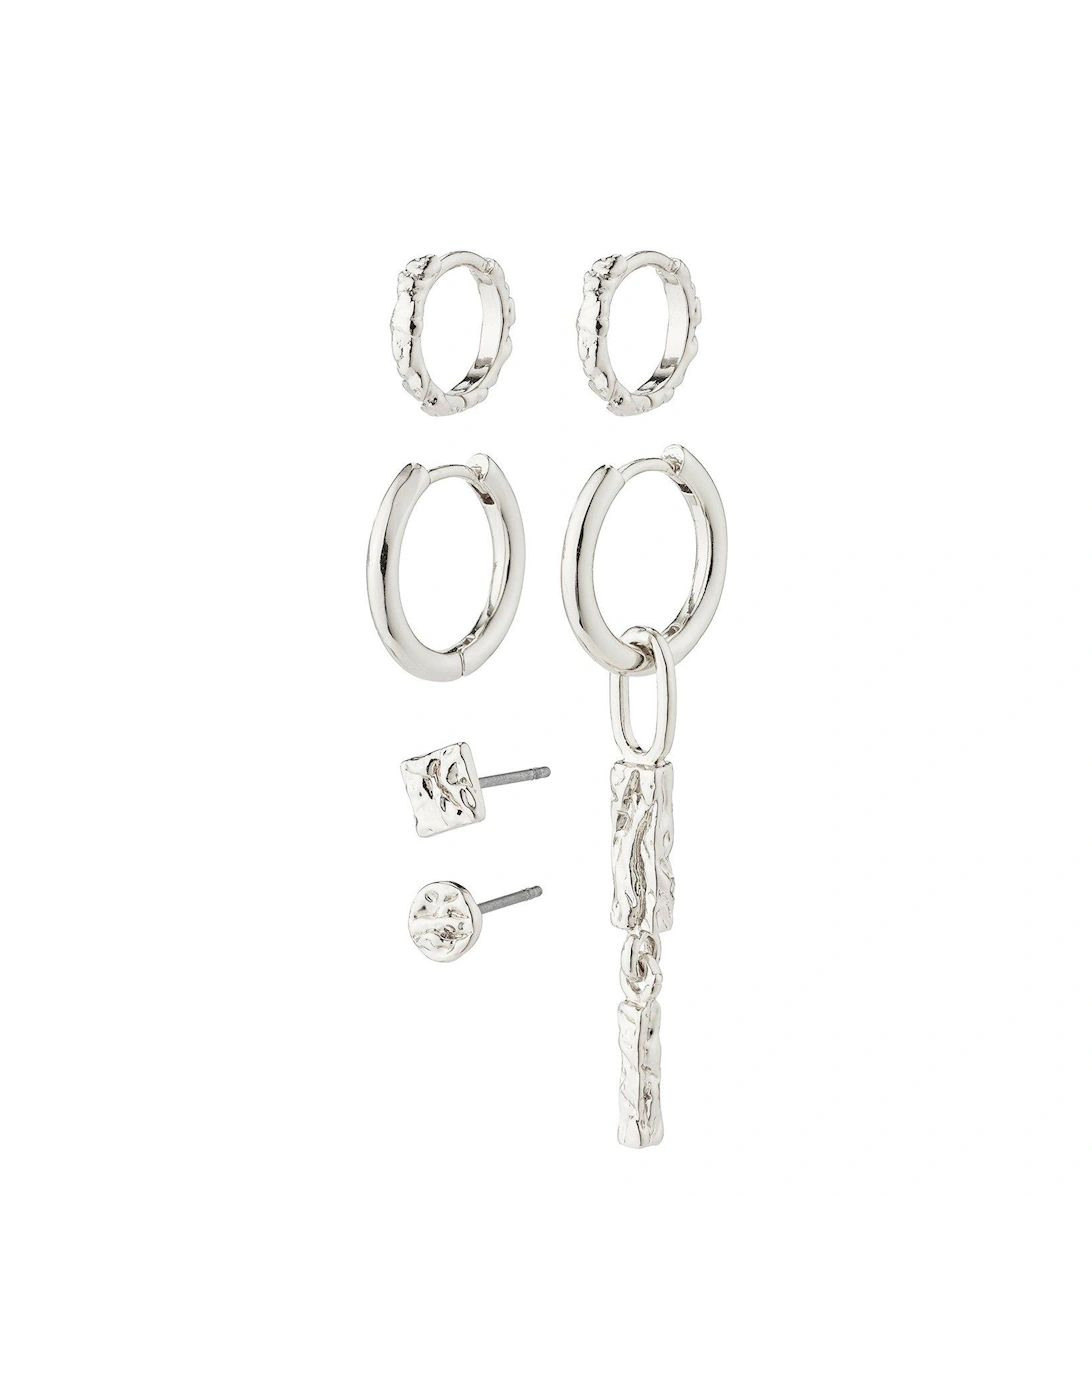 STAR Earrings, 3-in-1 Set - Silver-Plated, 2 of 1